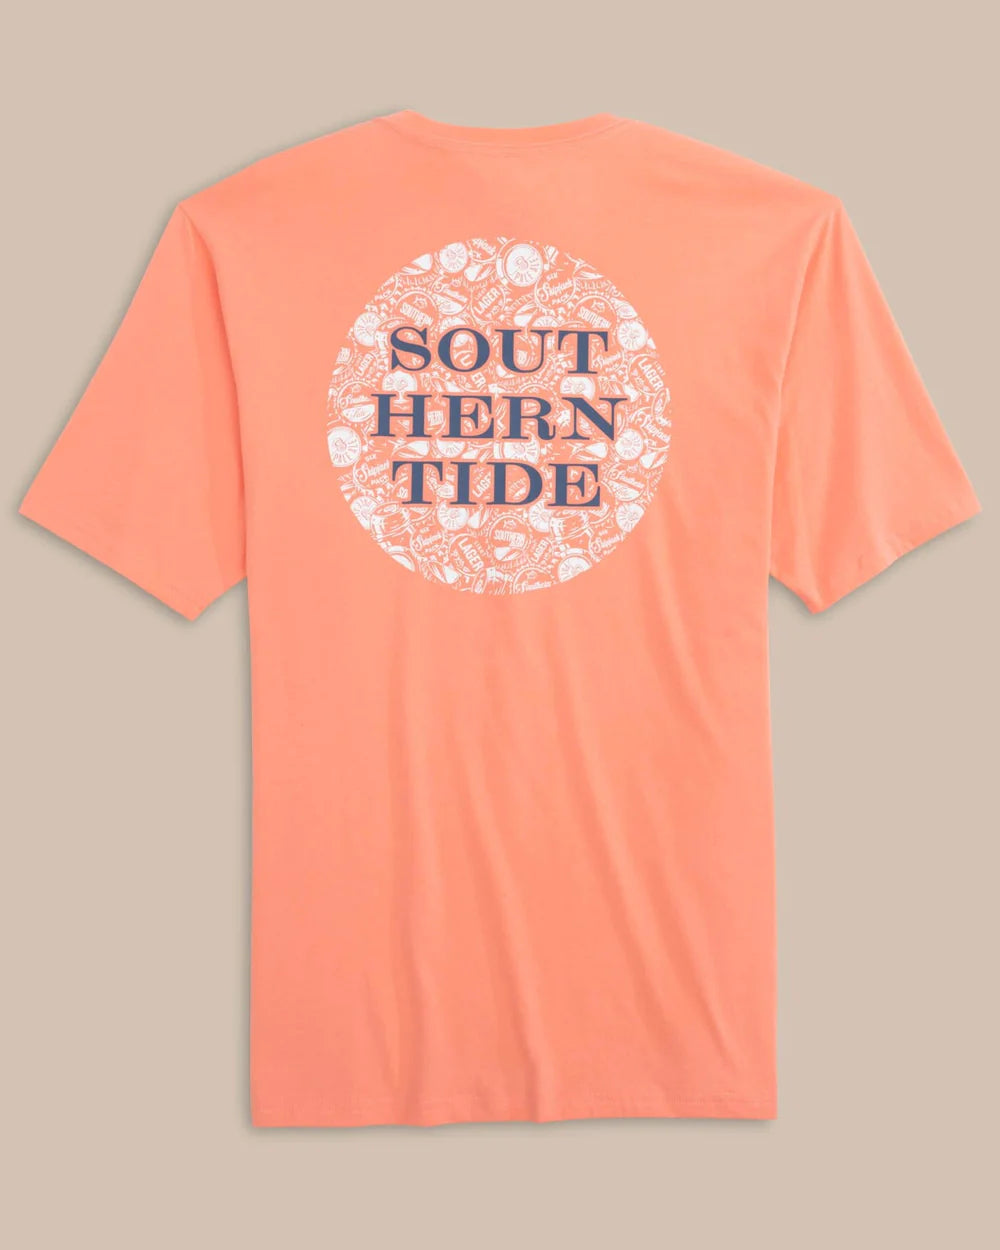 Southern Tide M SS Caps off Badge Tee